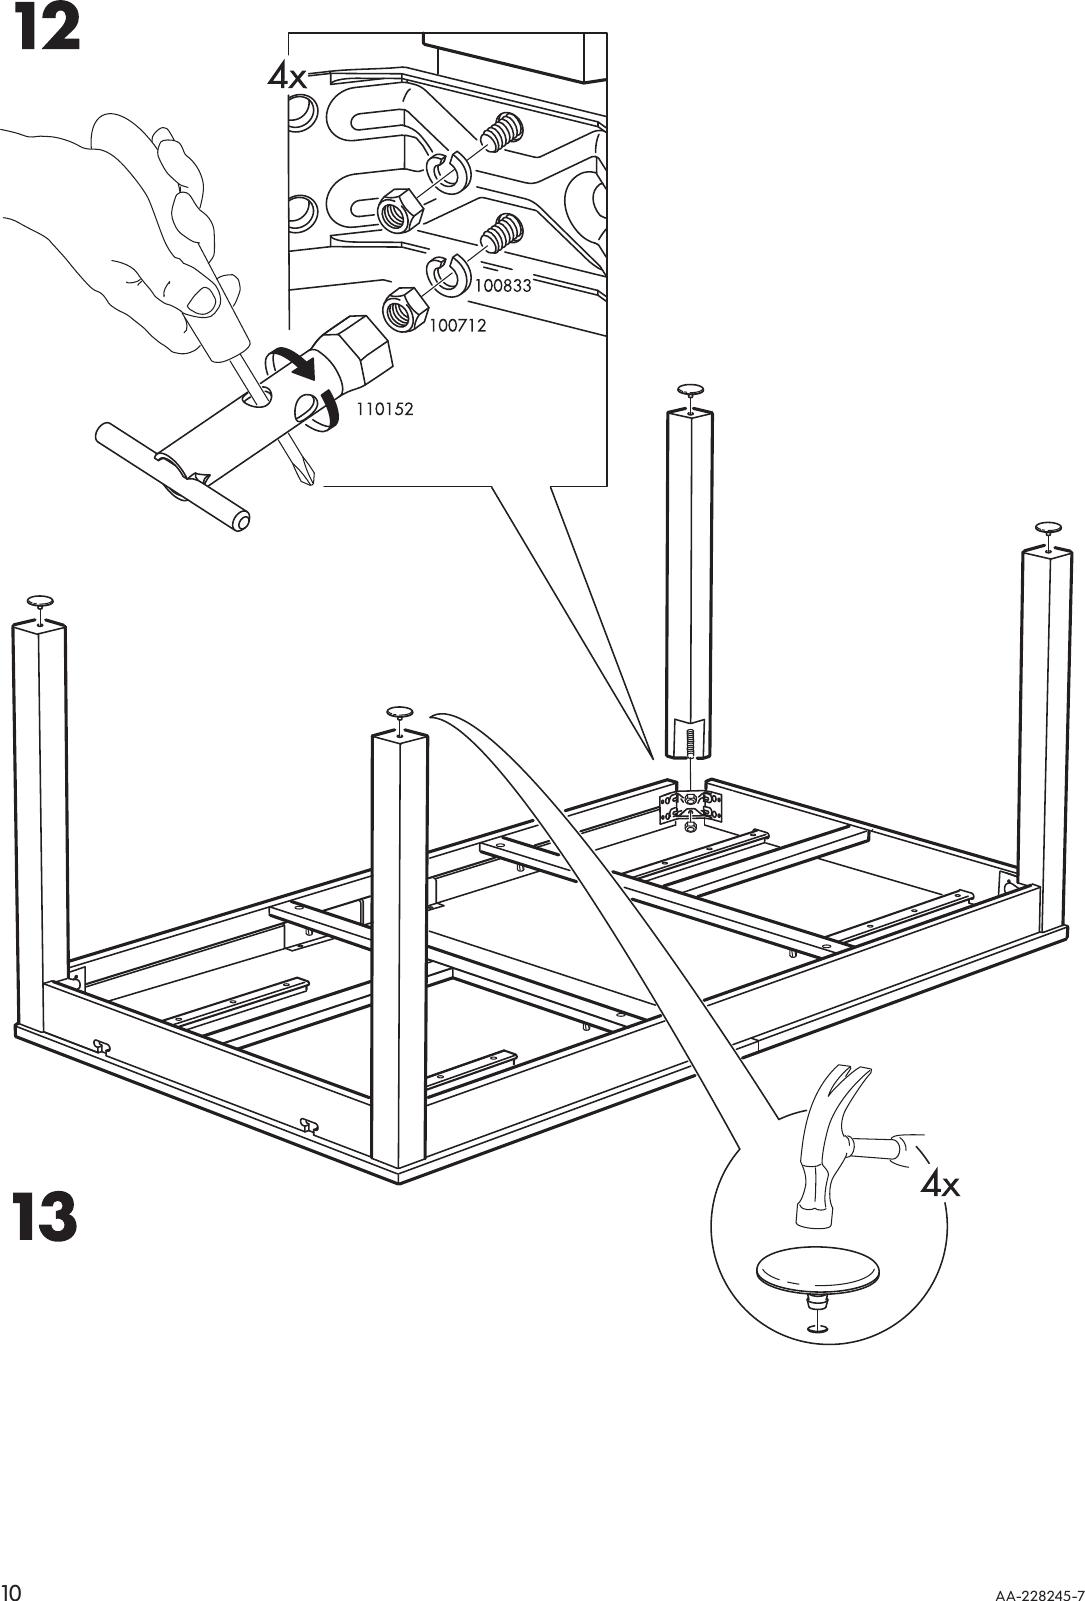 Page 10 of 12 - Ikea Ikea-Bjursta-Extendable-Dining-Table-69-86-102-X37-Assembly-Instruction